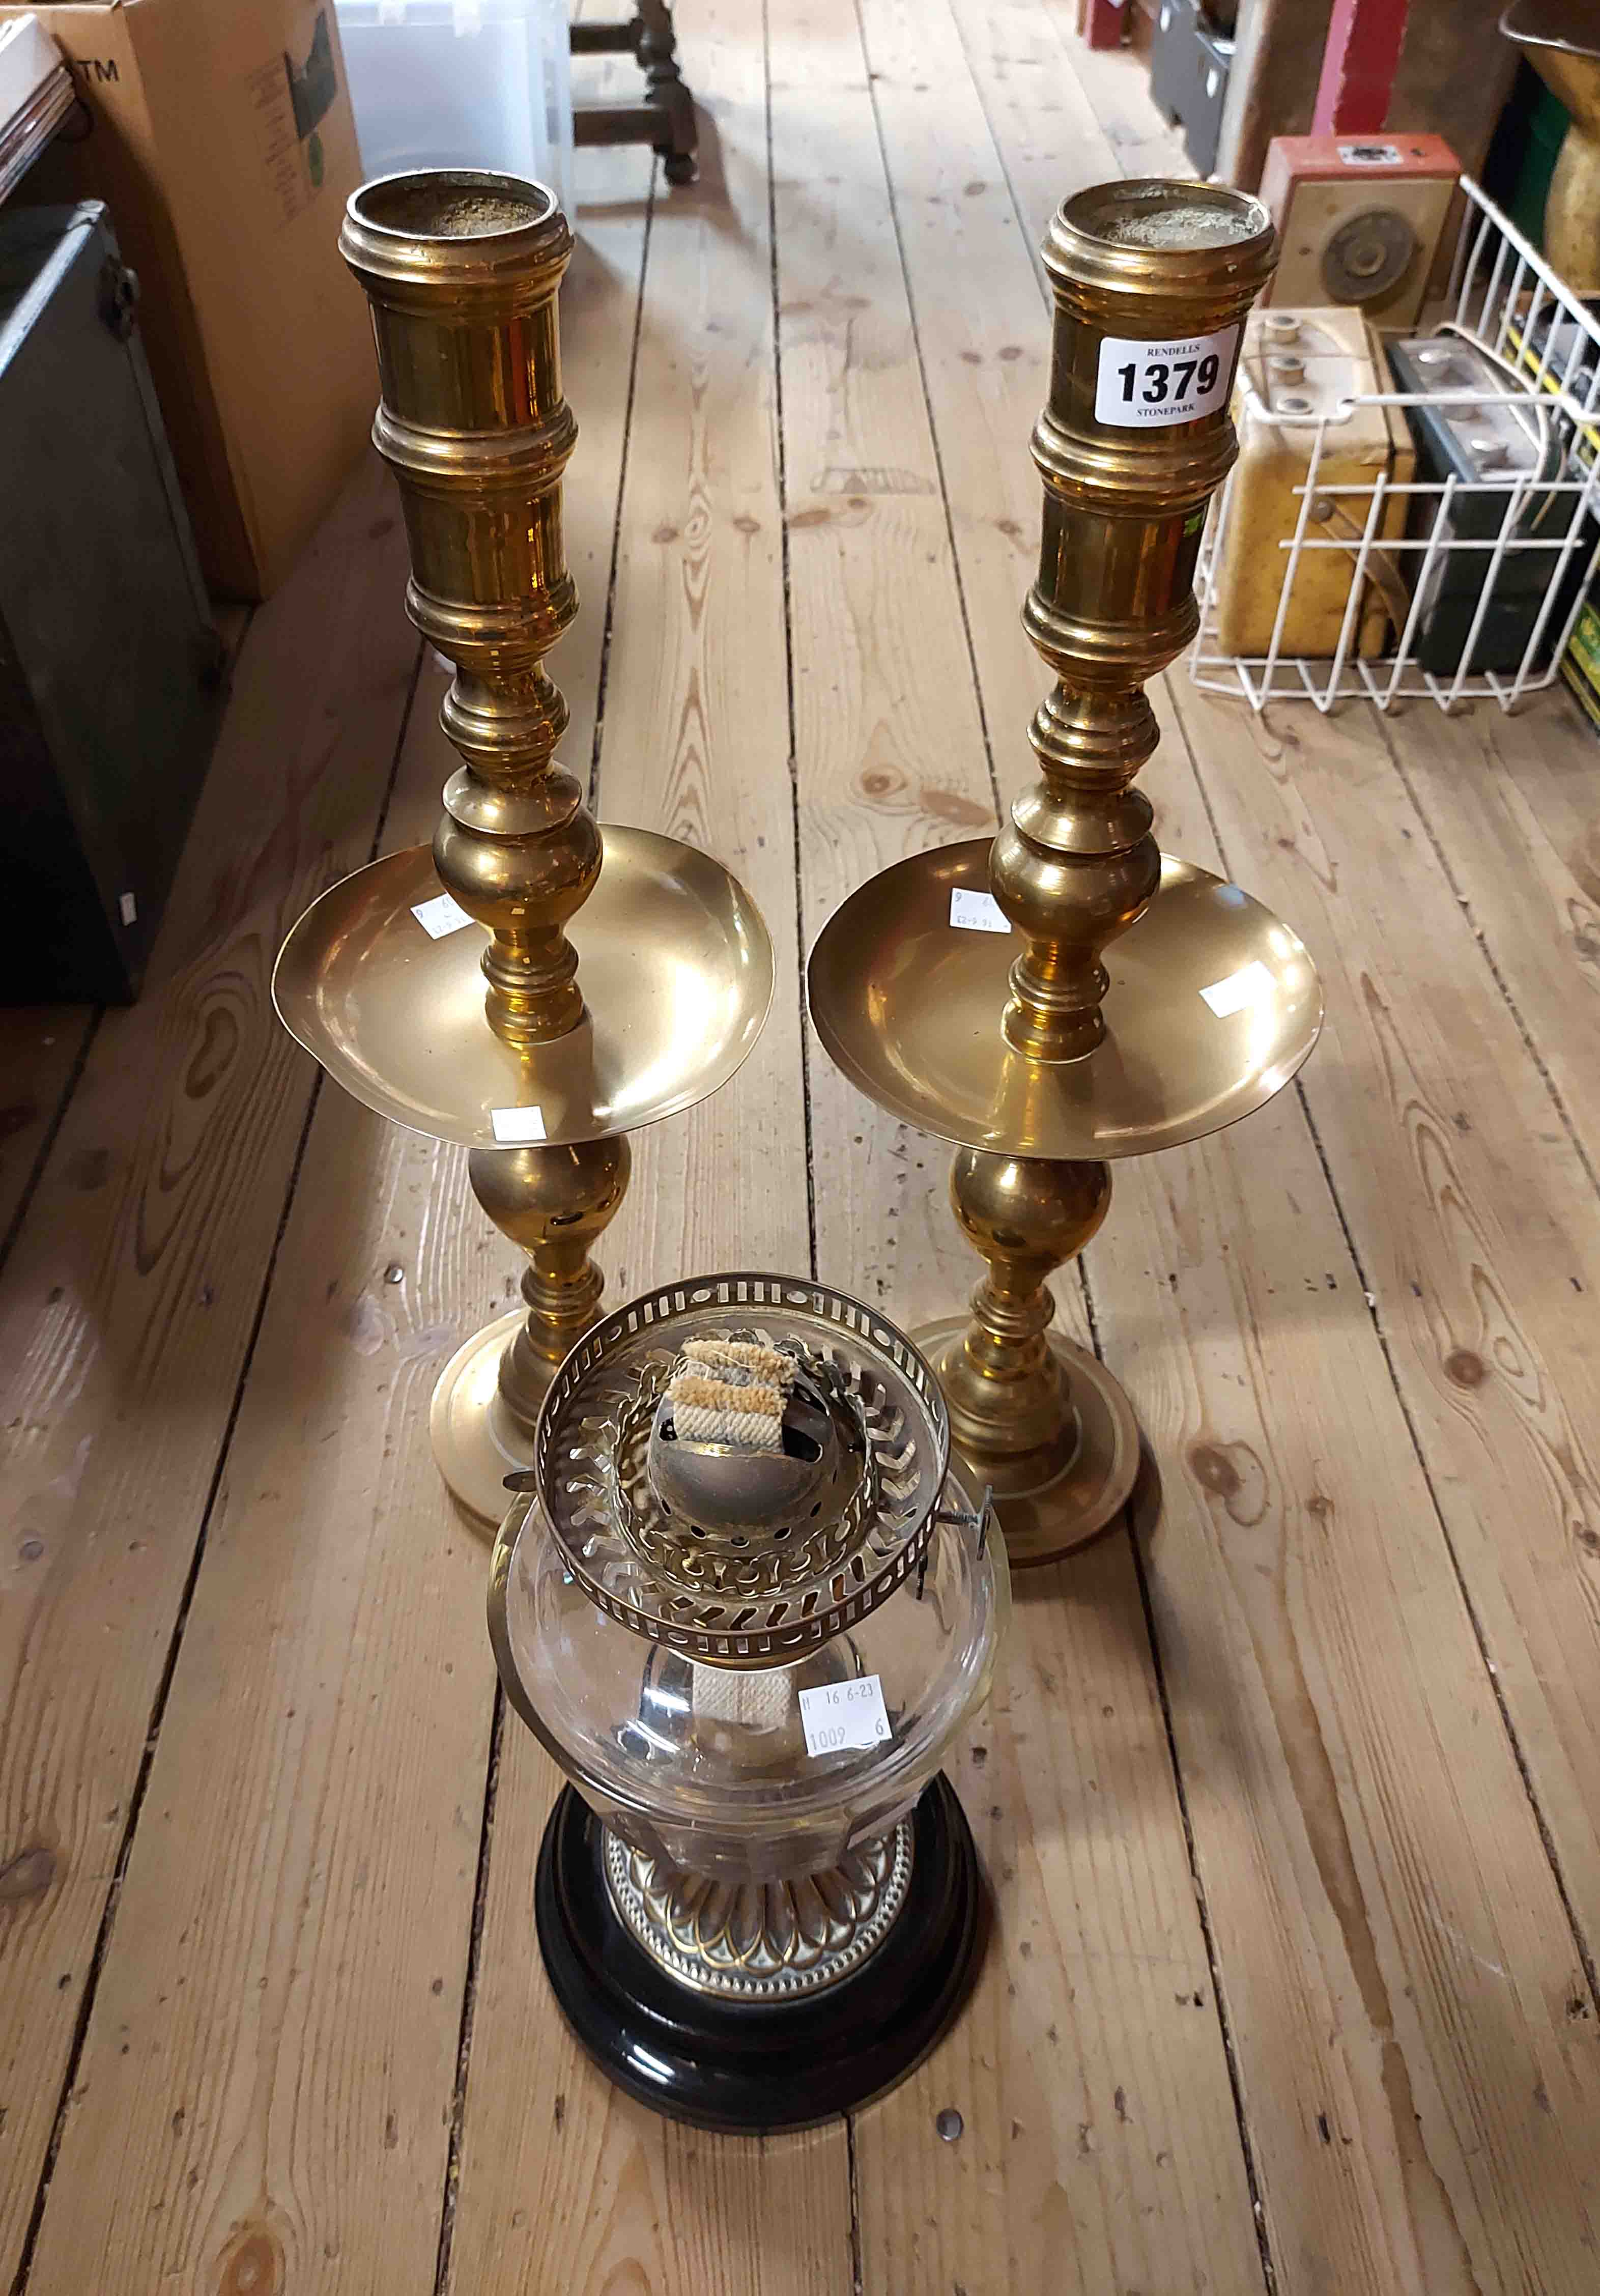 A pair of large 20th Century spun brass candlesticks with central drip trays in the antique